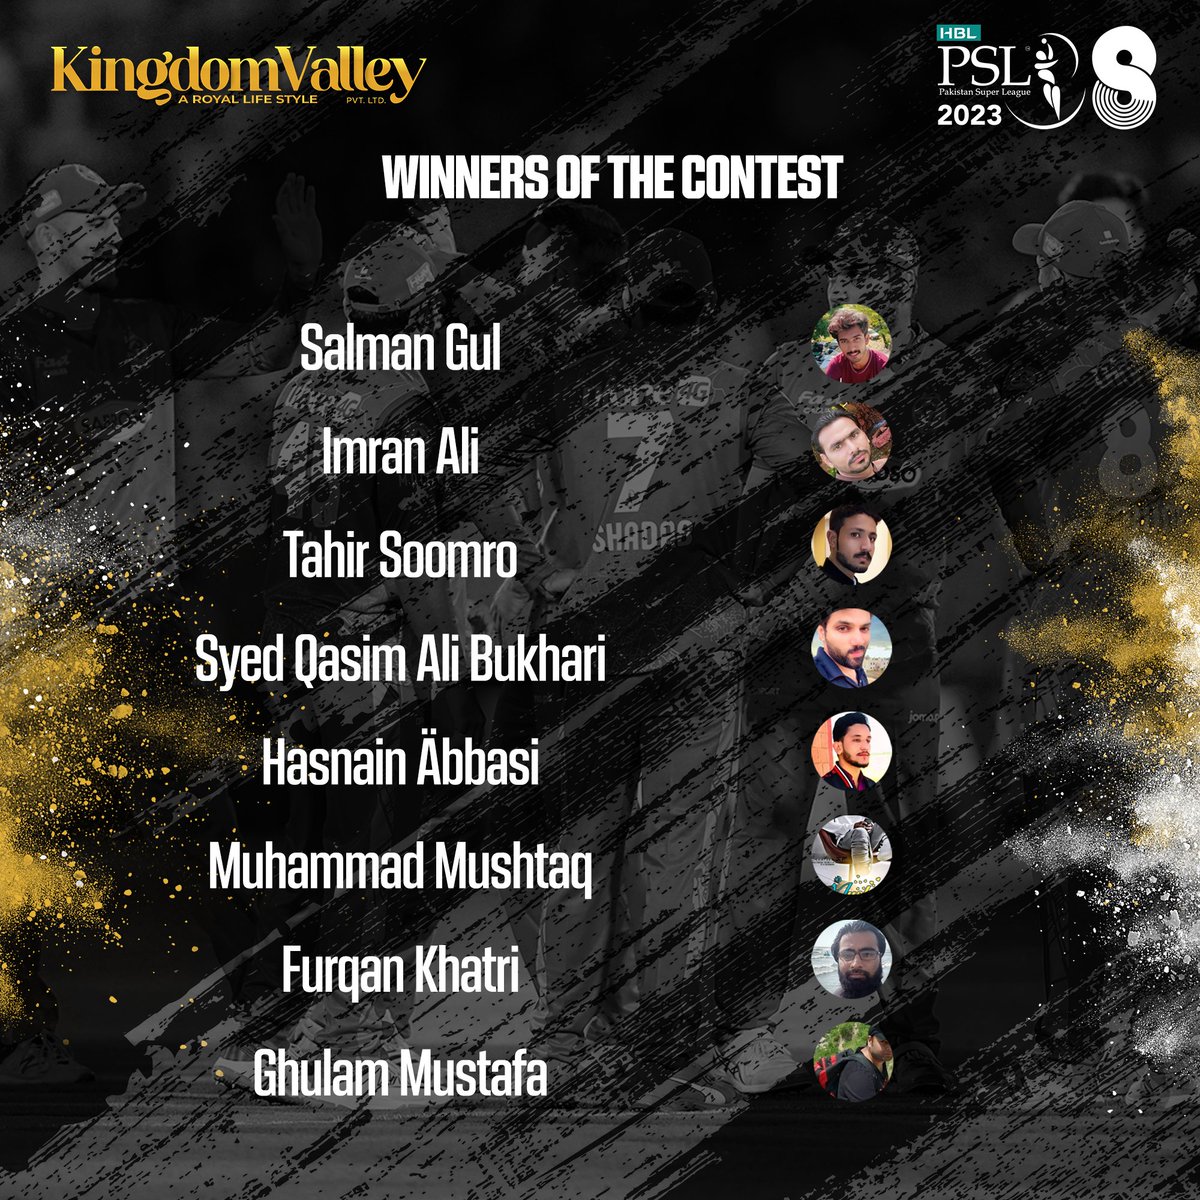 Congratulations to the lucky winners!
Inbox us your details to avail the prize.

#KingdomValley #HamarayHeroes2023 #HBLPSL8